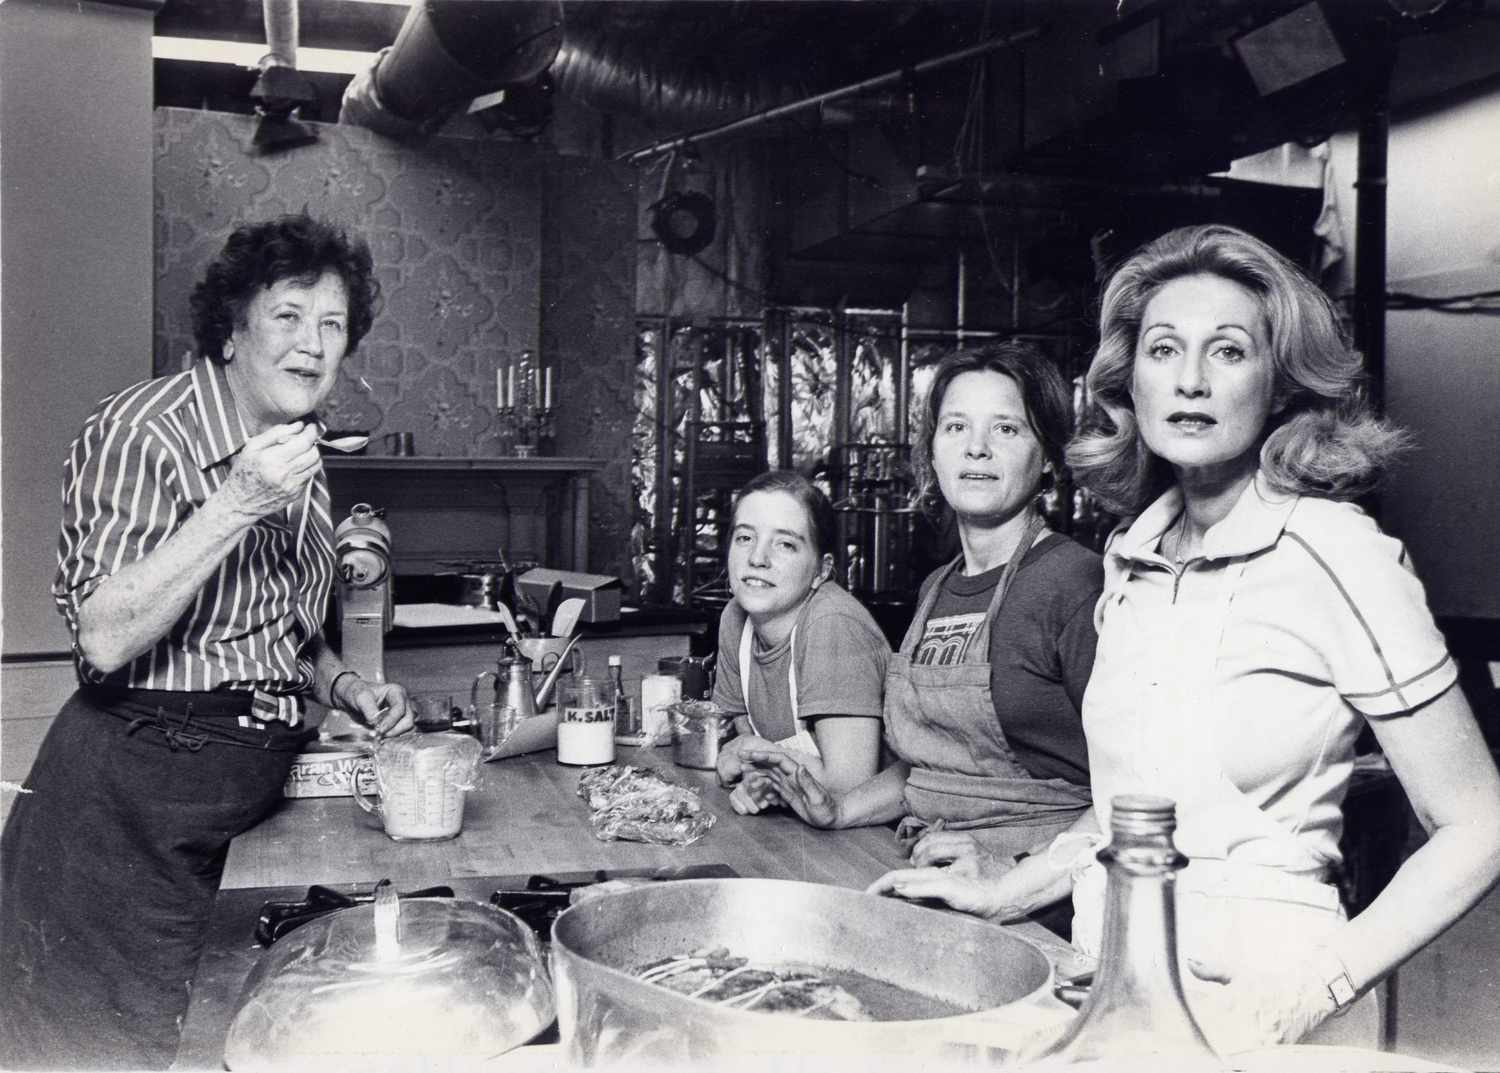 Julia Child, Sara Moulton, and two others on the set of Julia Child and More Company